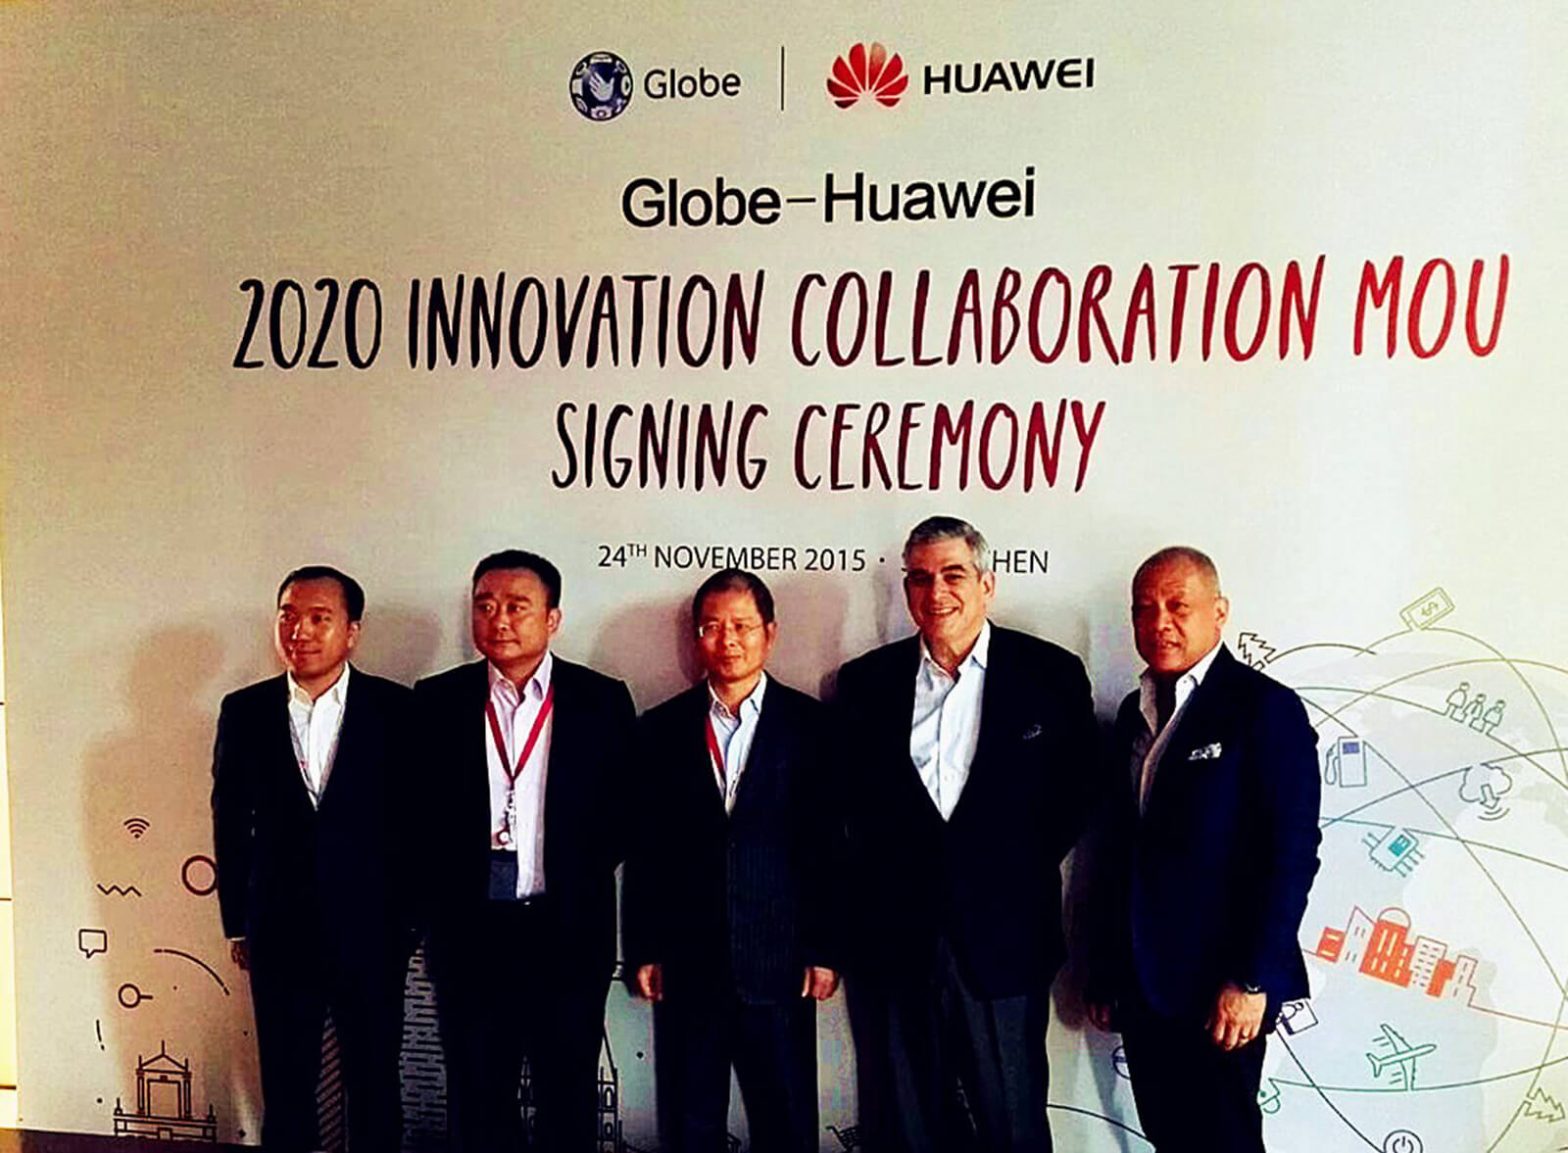 Globe signs deal with Huawei to expand mobile network, elevate PH internet experience